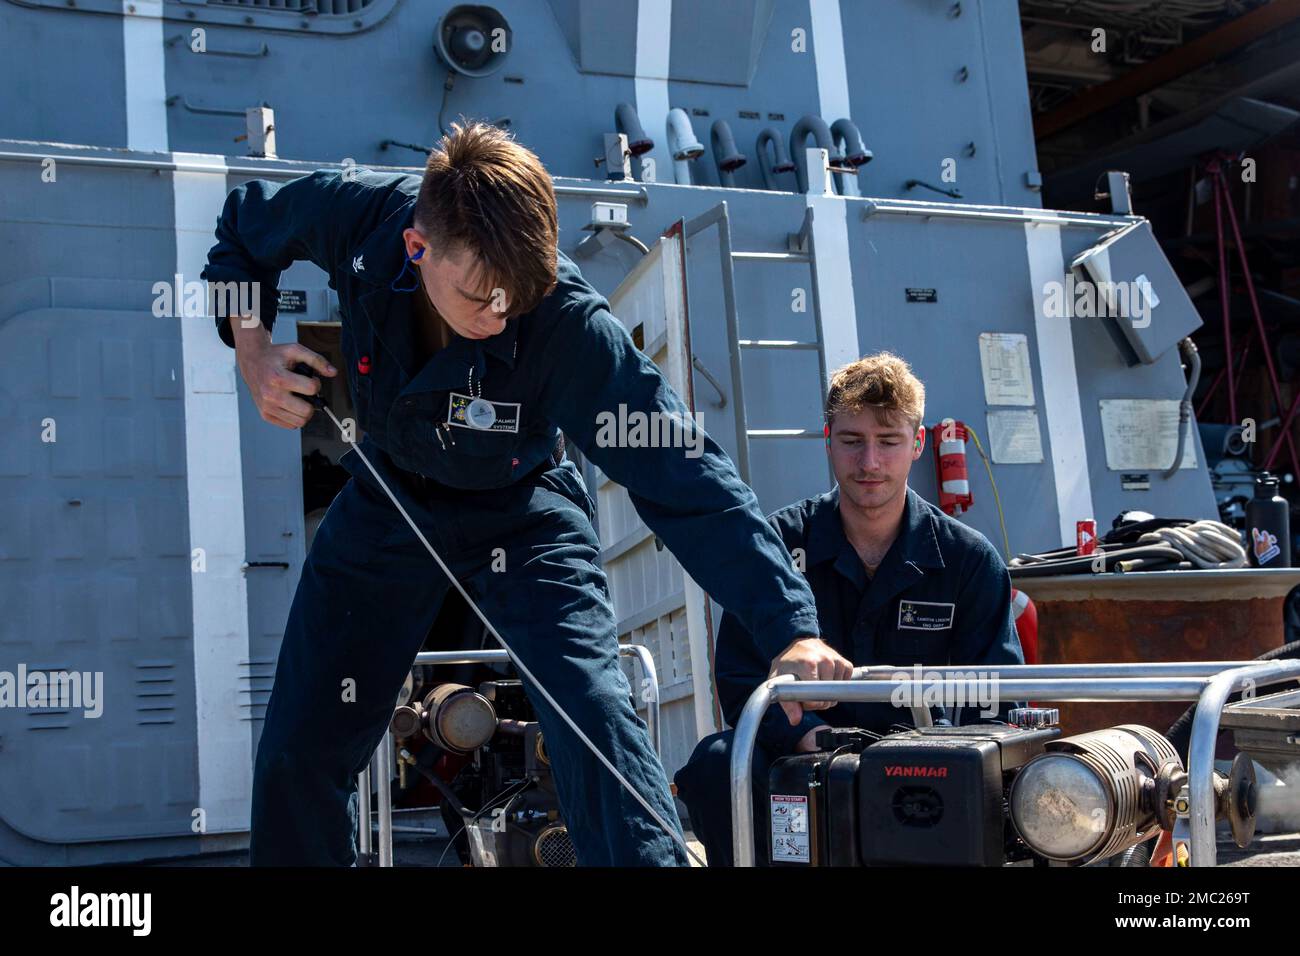 220623-N-UL352-1015 ATLANTIC OCEAN (June 23, 2022) Fireman Cameron Loesche, right, trains Electronics Technician 3rd Class Nathan Palmer, both assigned to the Arleigh Burke-class guided-missile destroyer USS Delbert D. Black (DDG 119), on the use of a portable suction pump, June 23, 2022. The George H.W. Bush Carrier Strike Group (CSG) is underway completing a certification exercise to increase U.S. and allied interoperability and warfighting capability before a future deployment. The George H.W. Bush CSG is an integrated combat weapons system that delivers superior combat capability to deter, Stock Photo